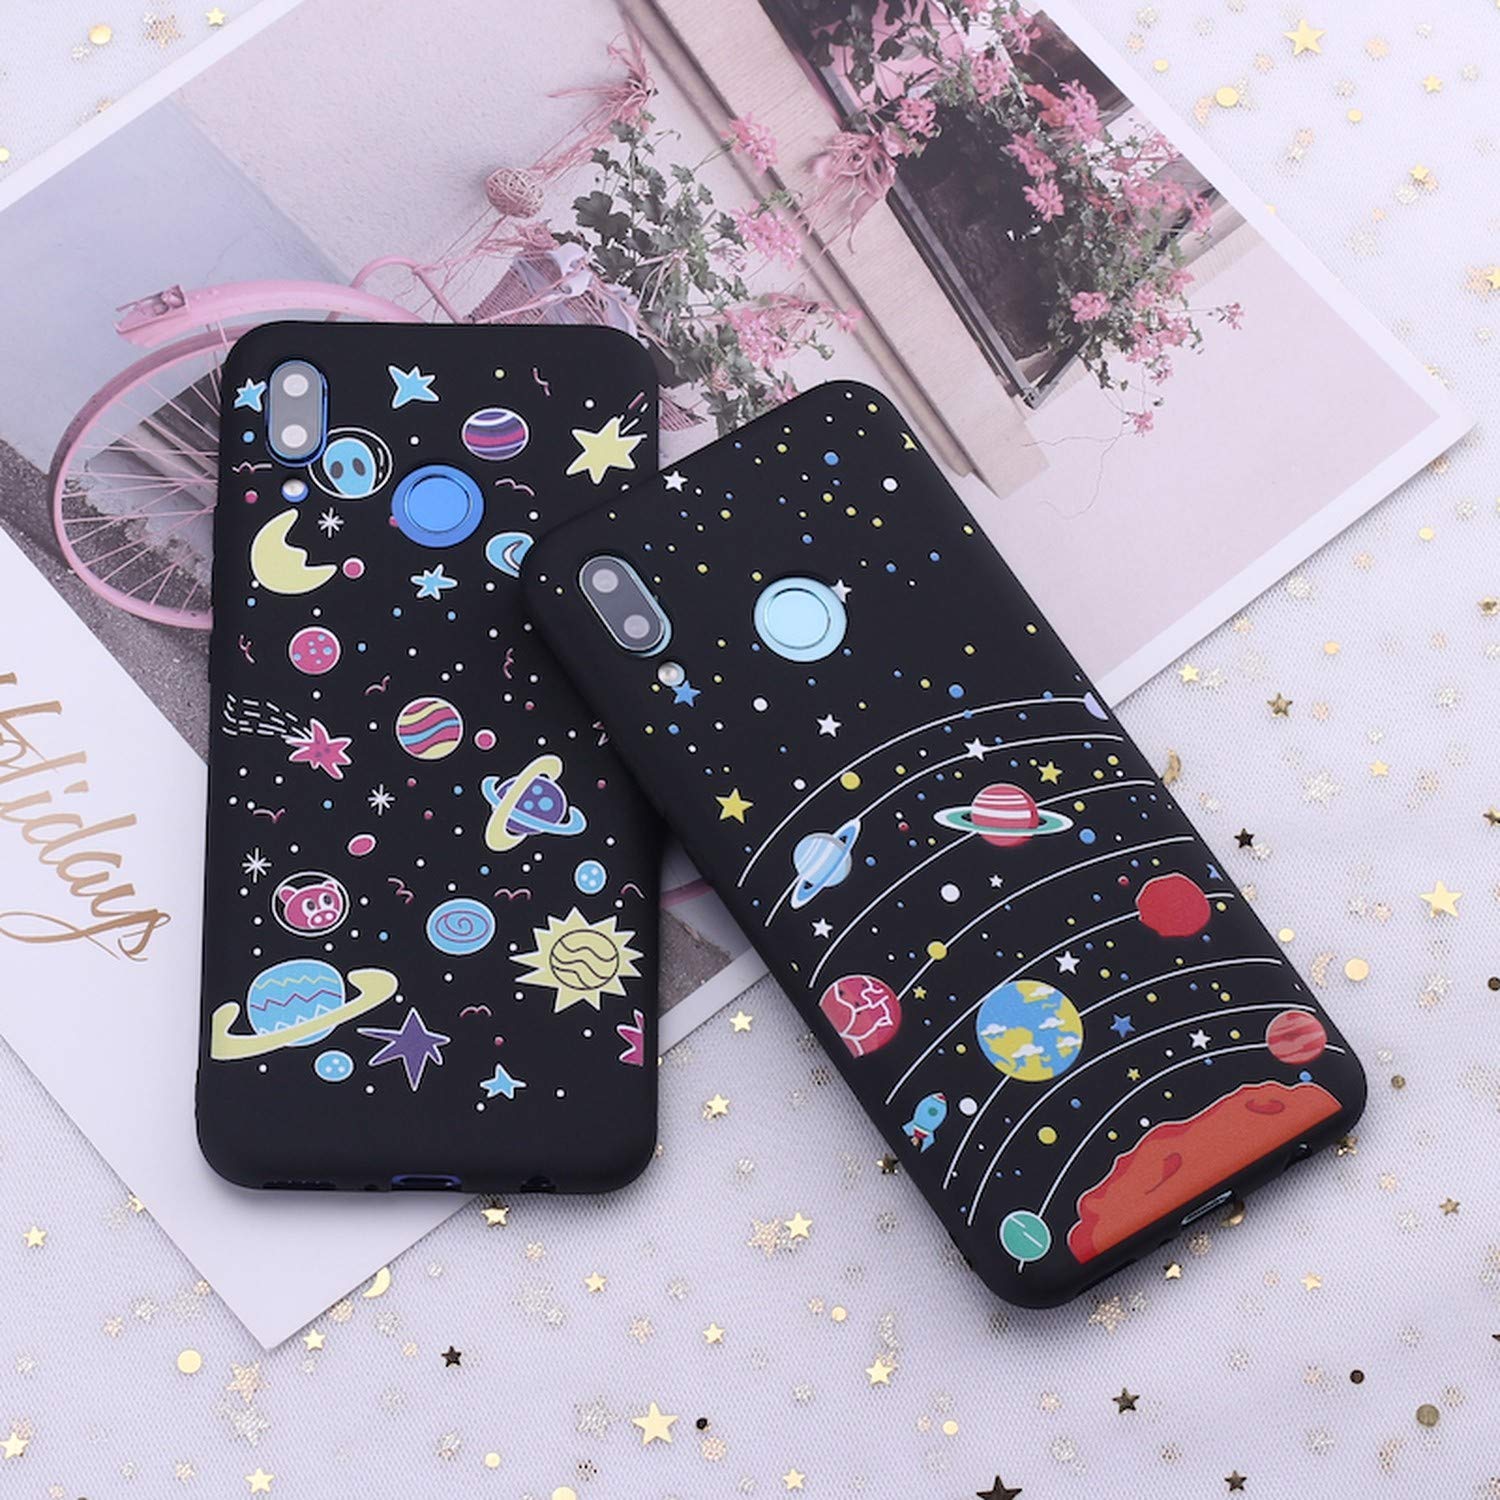 Huawei Honor Mate 10 20 Nova P20 P30 P Smart Space Moon Astronaut Stars Candy Silicone Phone Case Cover